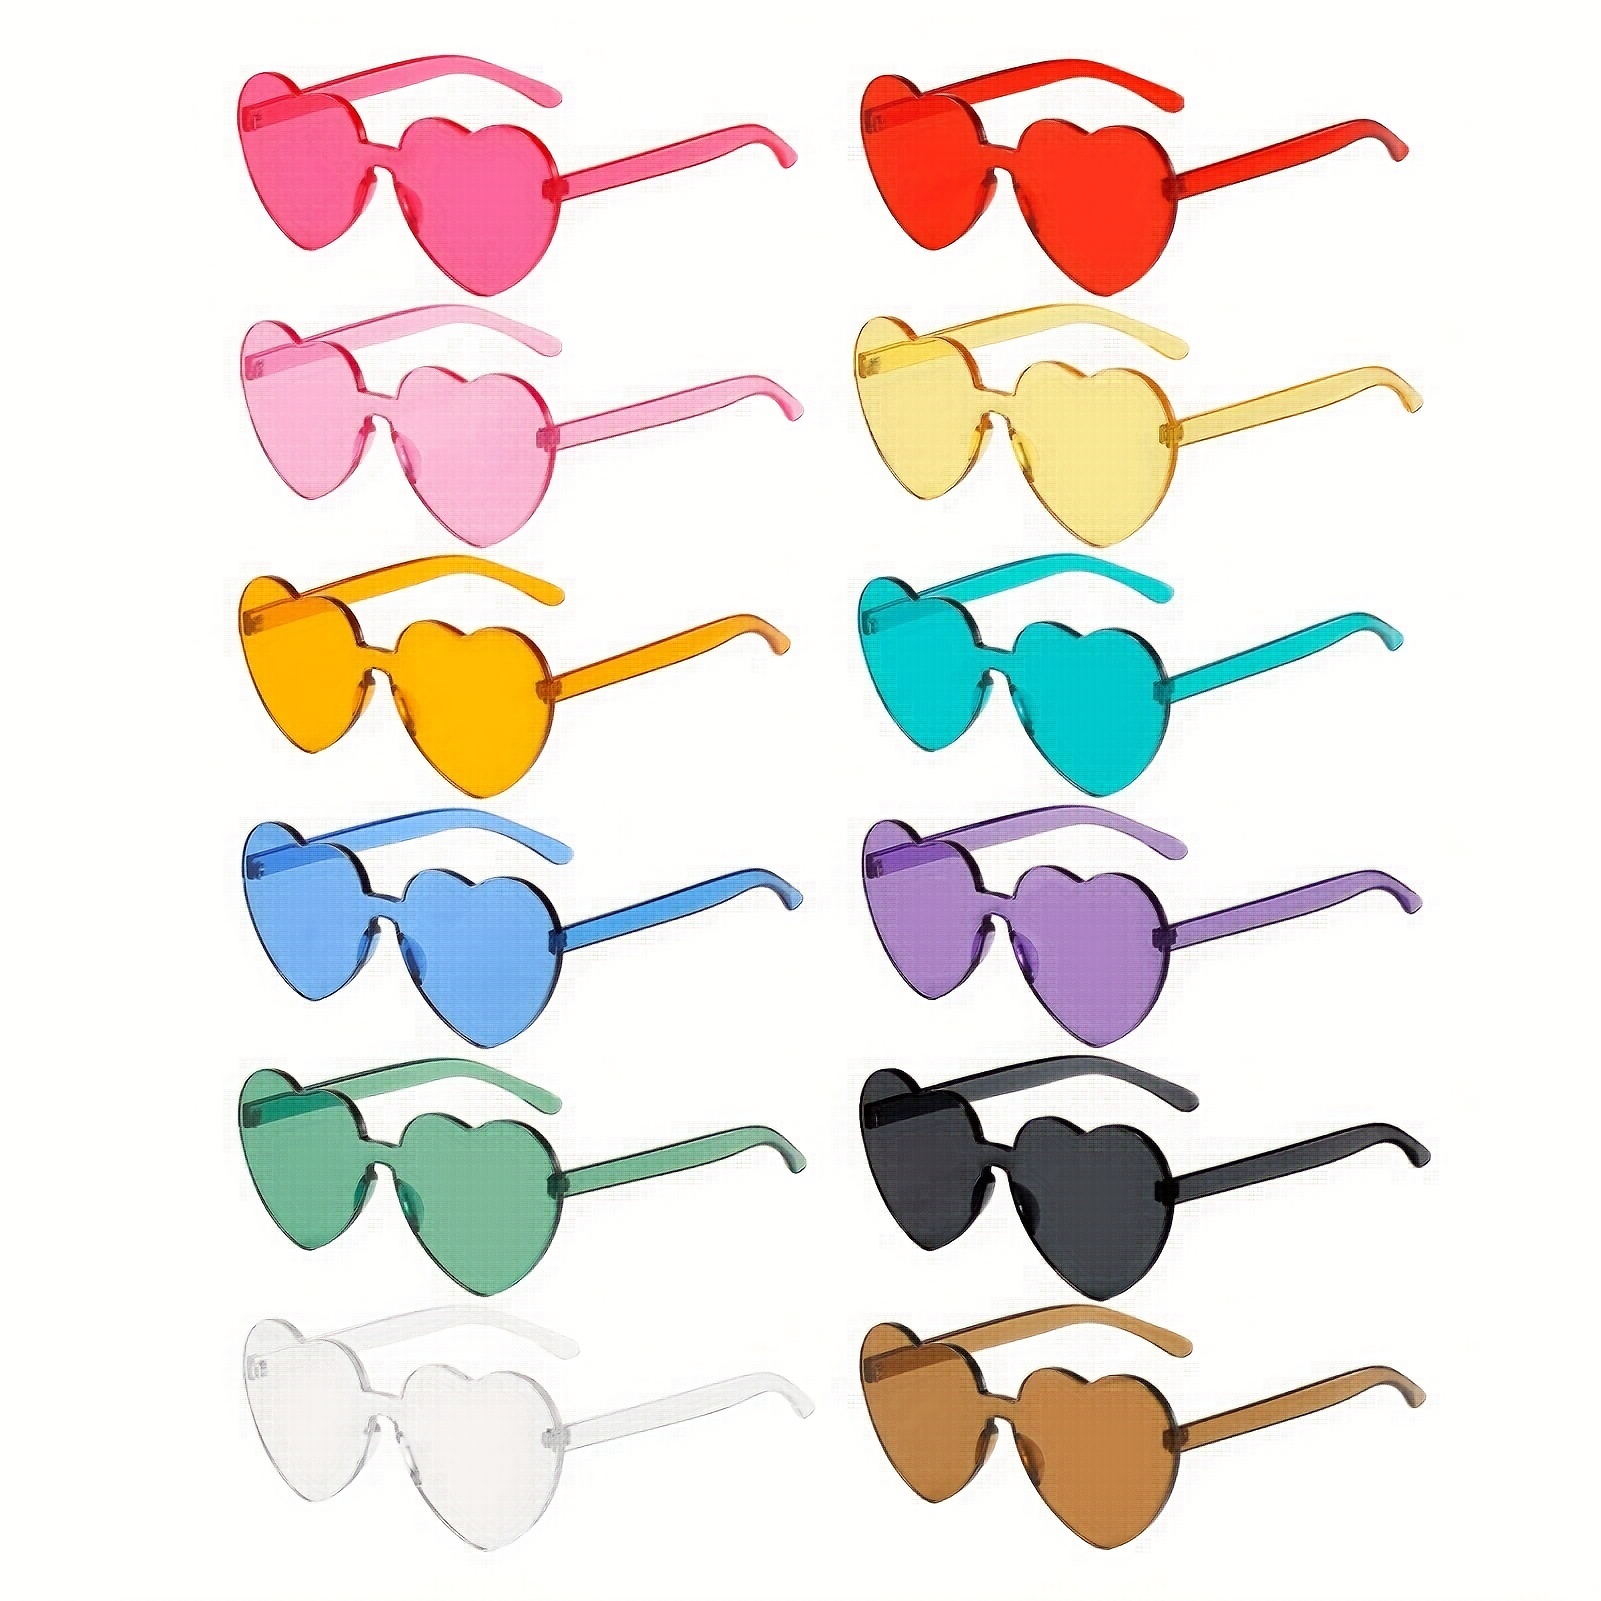 Funny glasses for carnivals, parties, birthdays, bachelorette parties, stag  parties - . Gift ideas